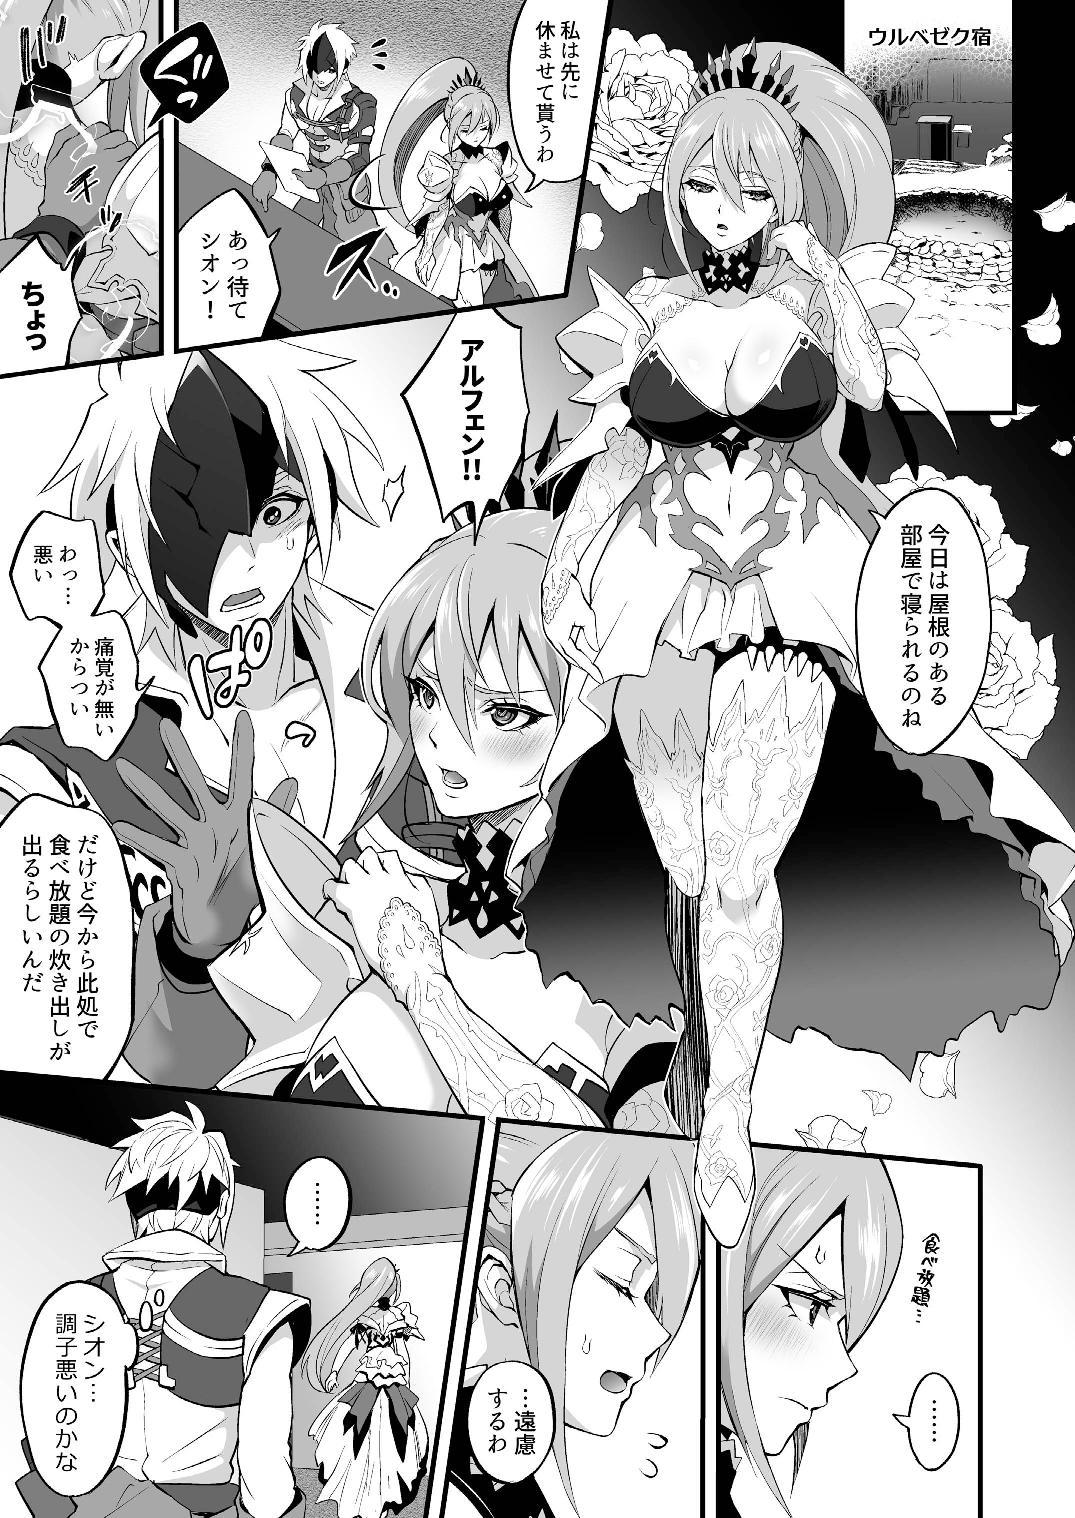 Fingers 私に詰め寄ると〇〇〇がイくわよ…! - Tales of arise T Girl - Page 3